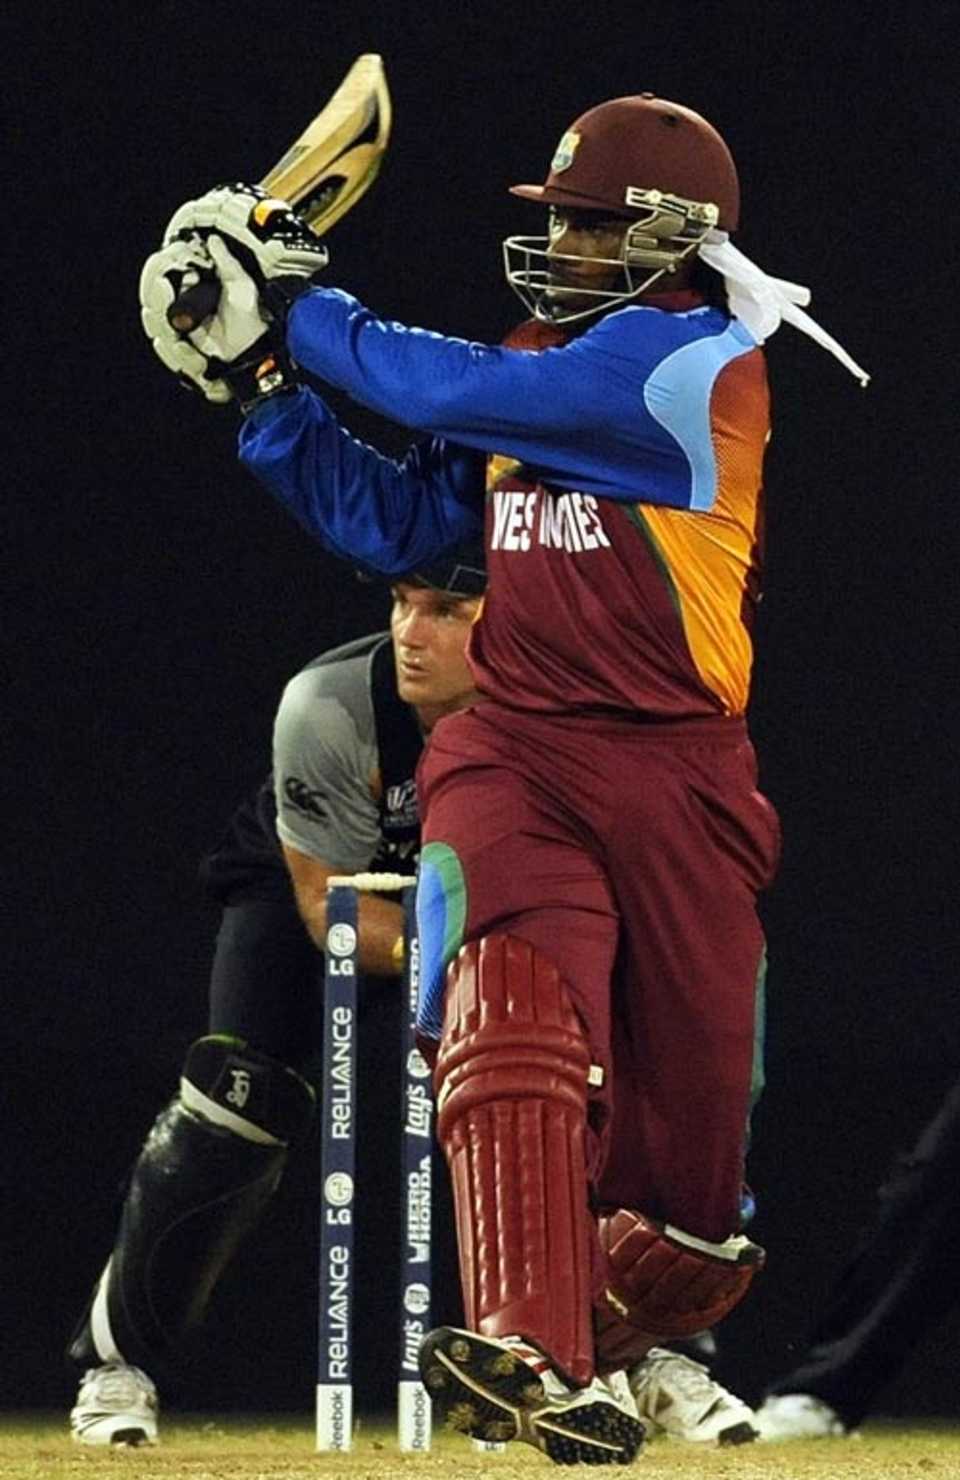 Chris Gayle goes for a pull